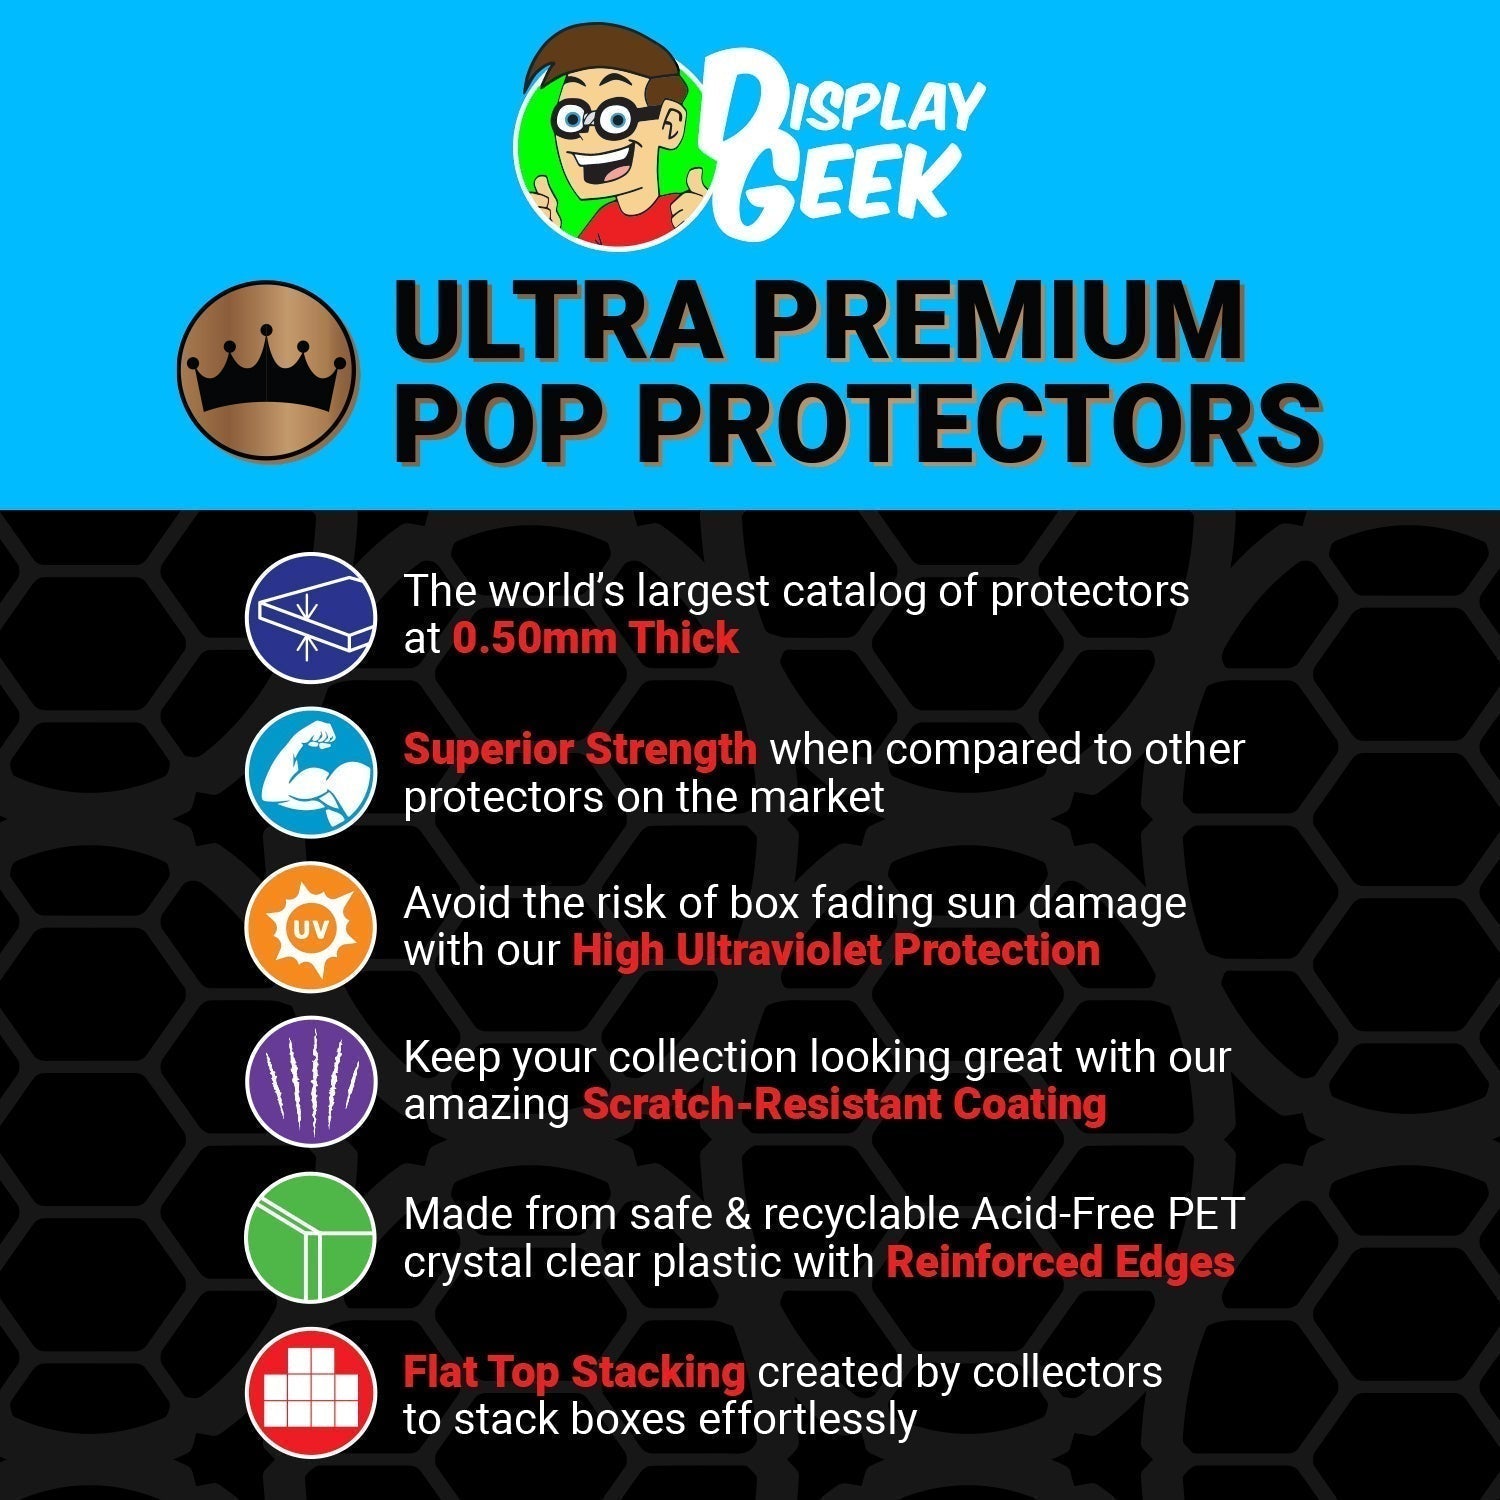 Pop Protector for 6 inch Baymax Disney Animation Studios #111 Super Funko Pop - PPG Pop Protector Guide Search Created by Display Geek